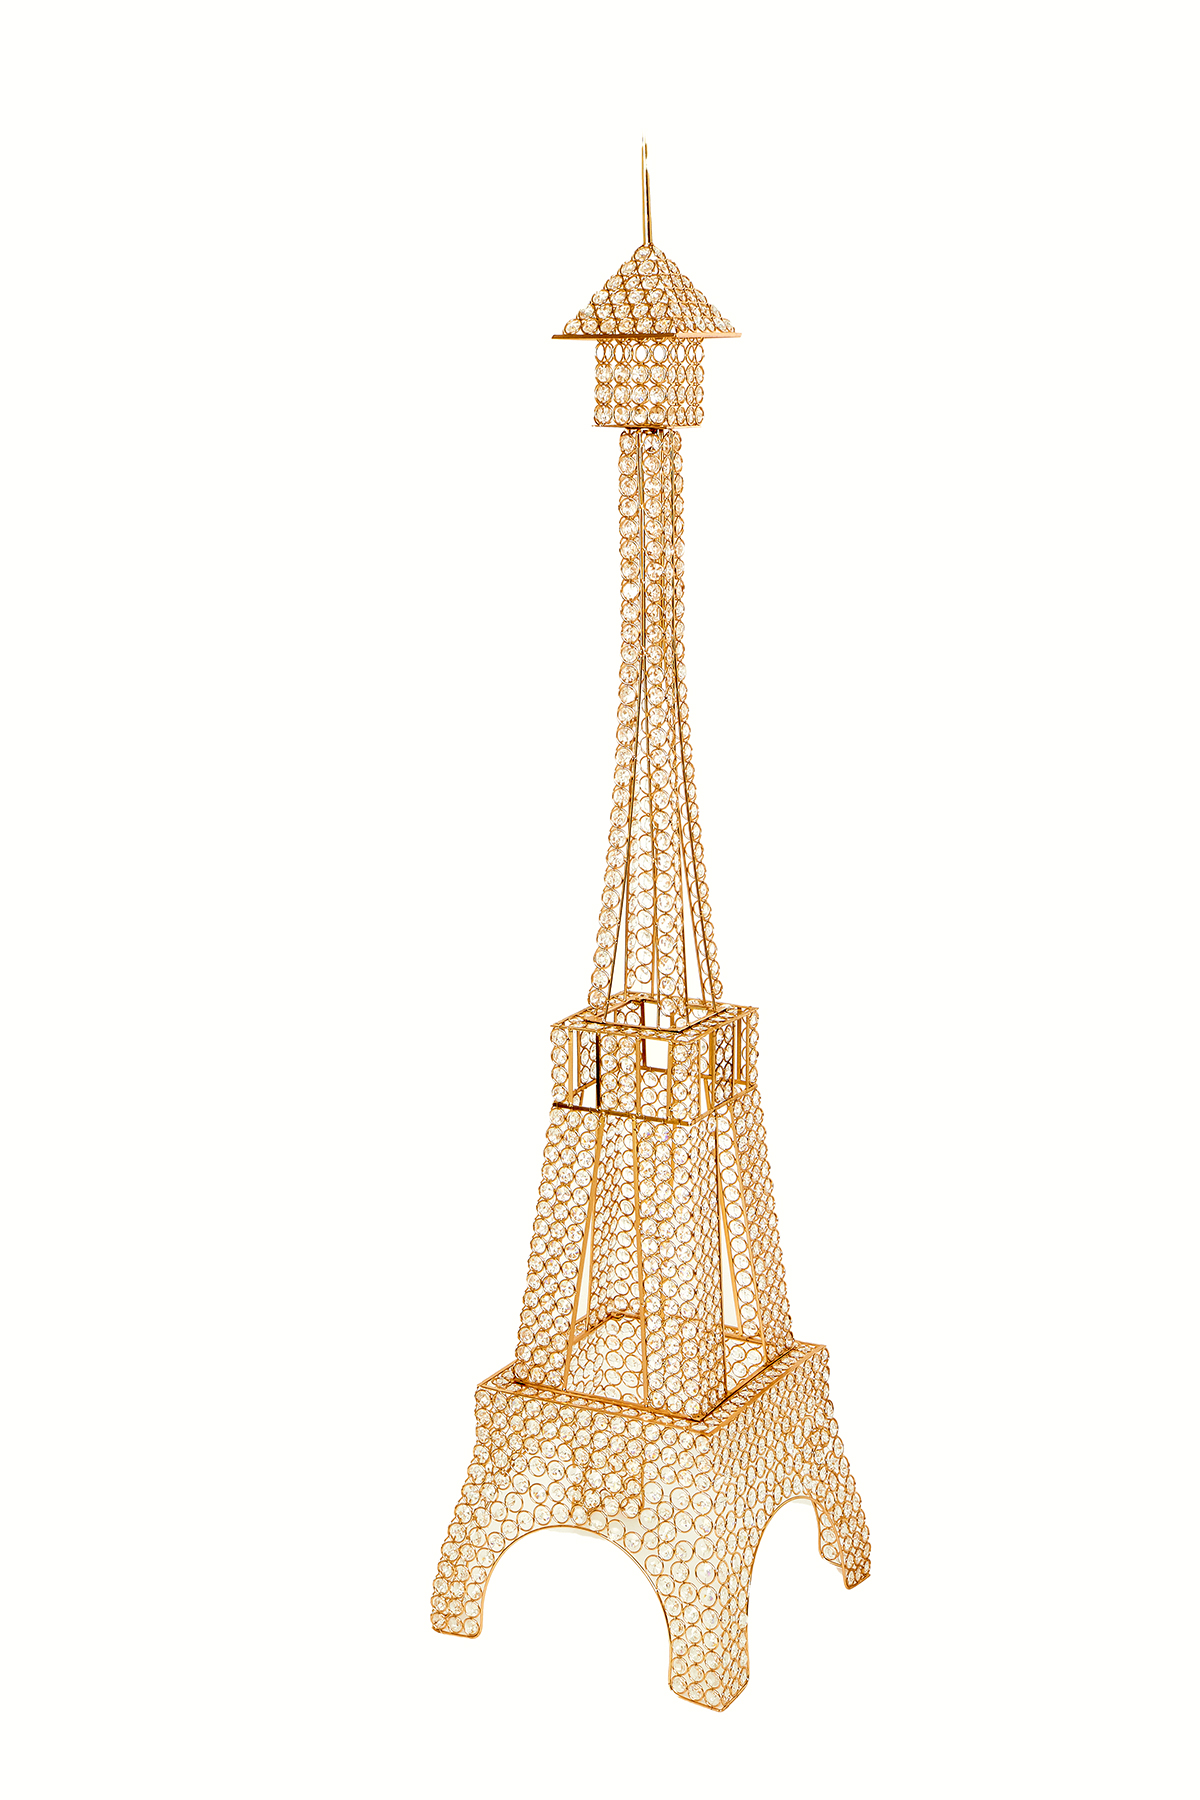 Crystal Beaded Tower 61" - Gold